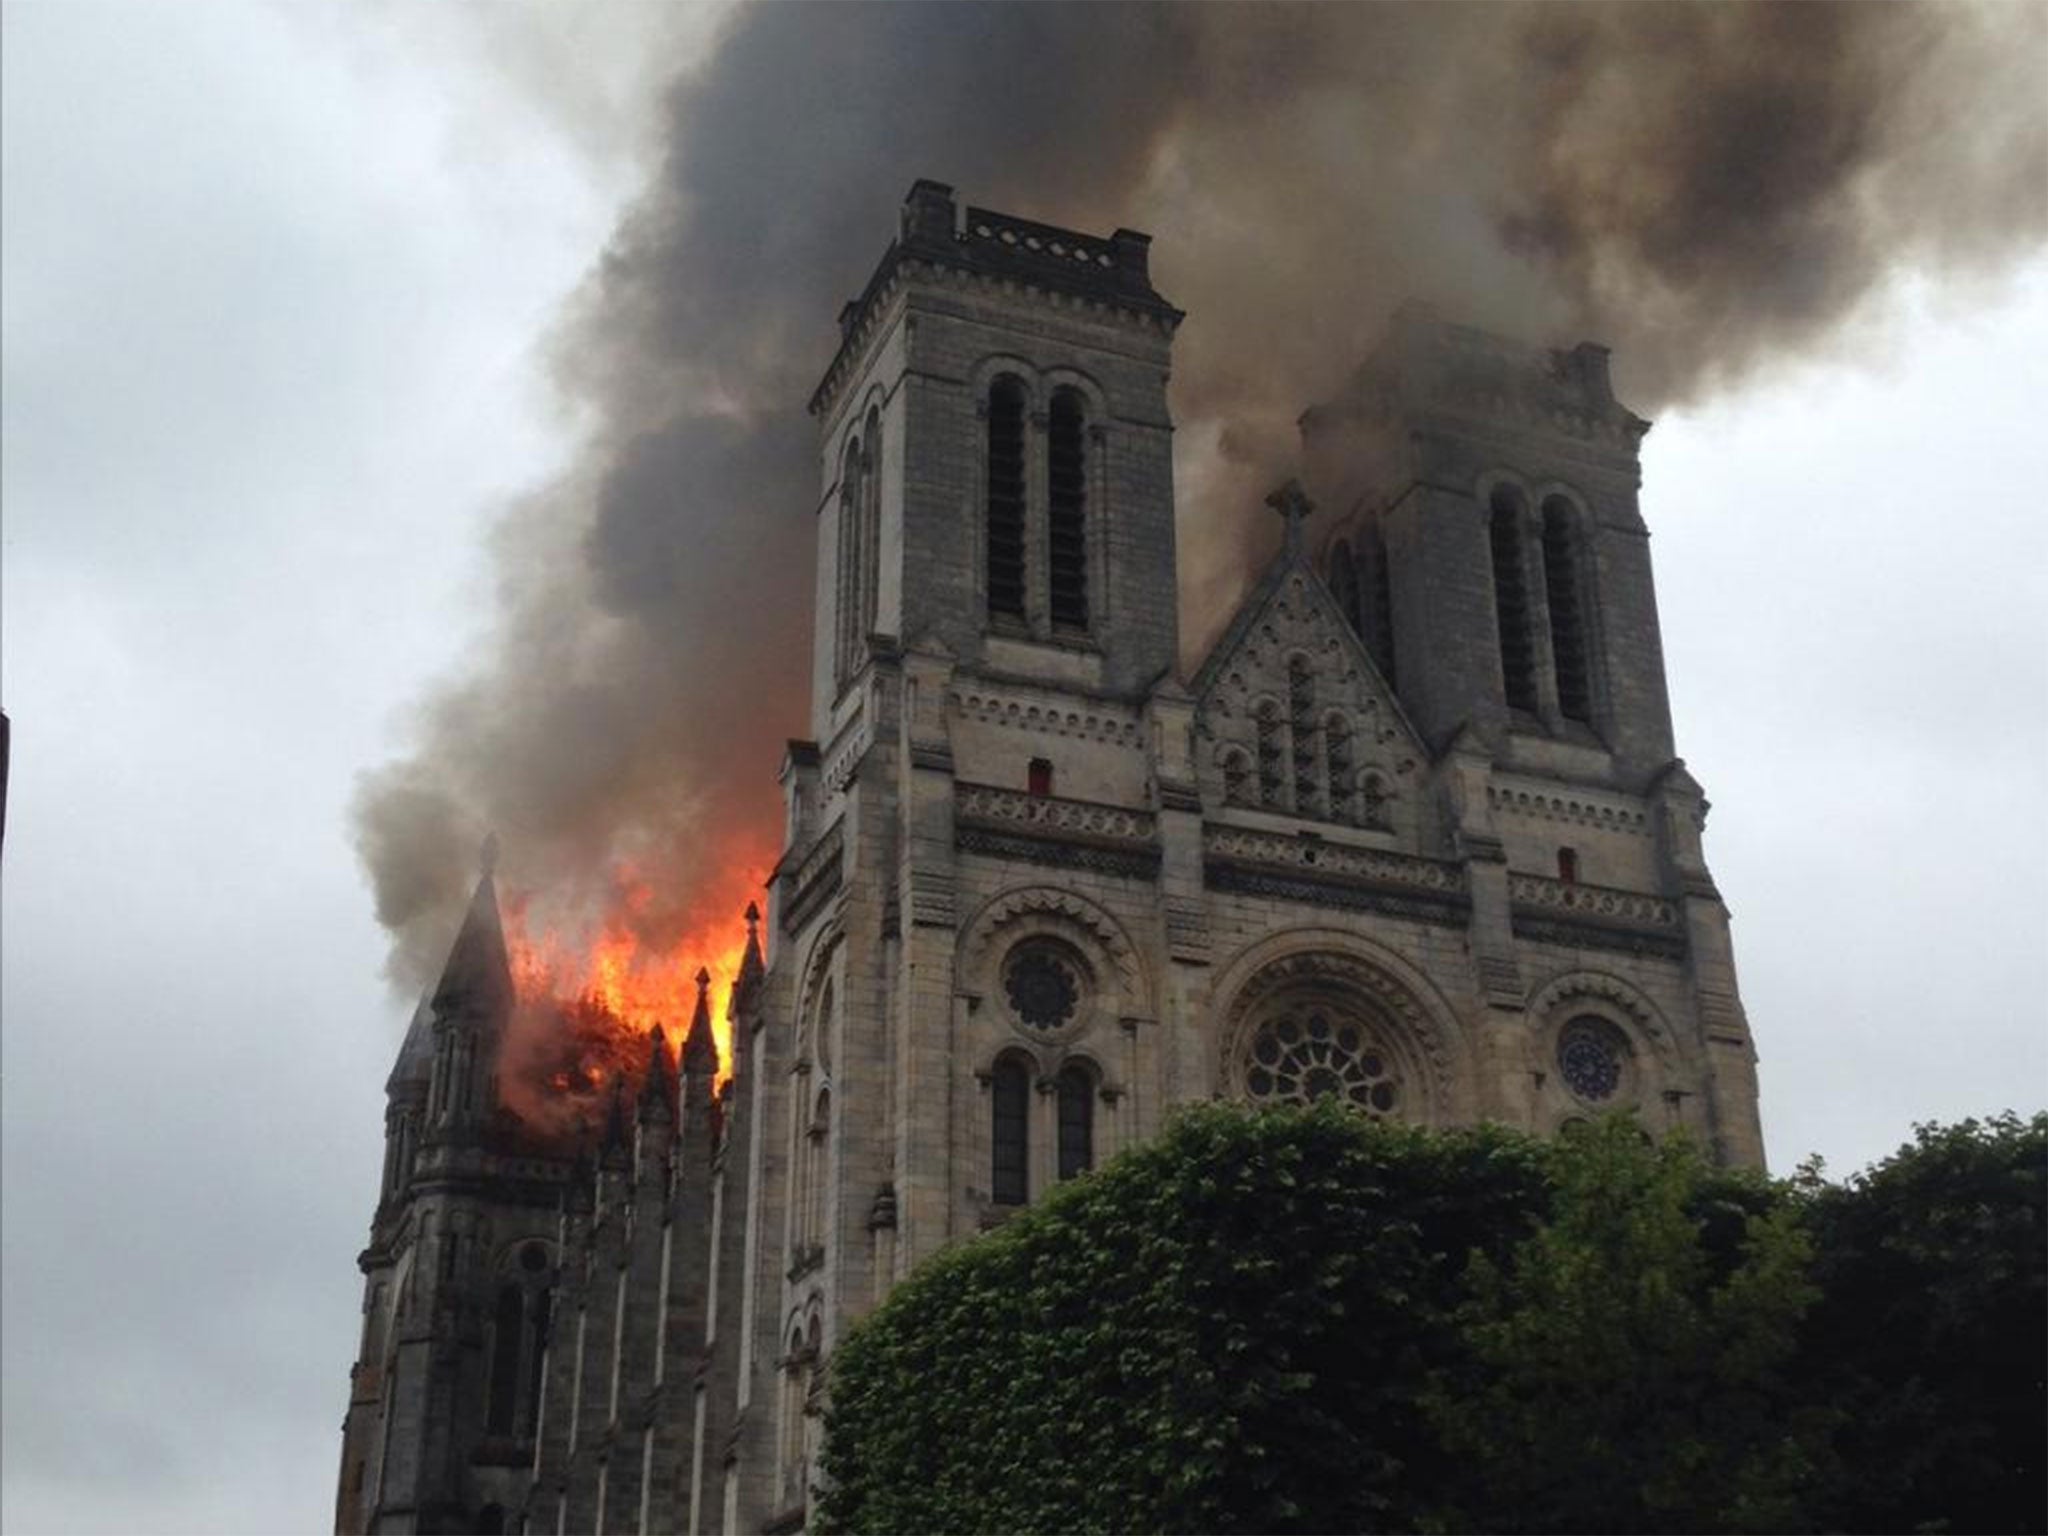 The fire at Basilique Saint Donatien is believed to have been started by two welders carrying out work